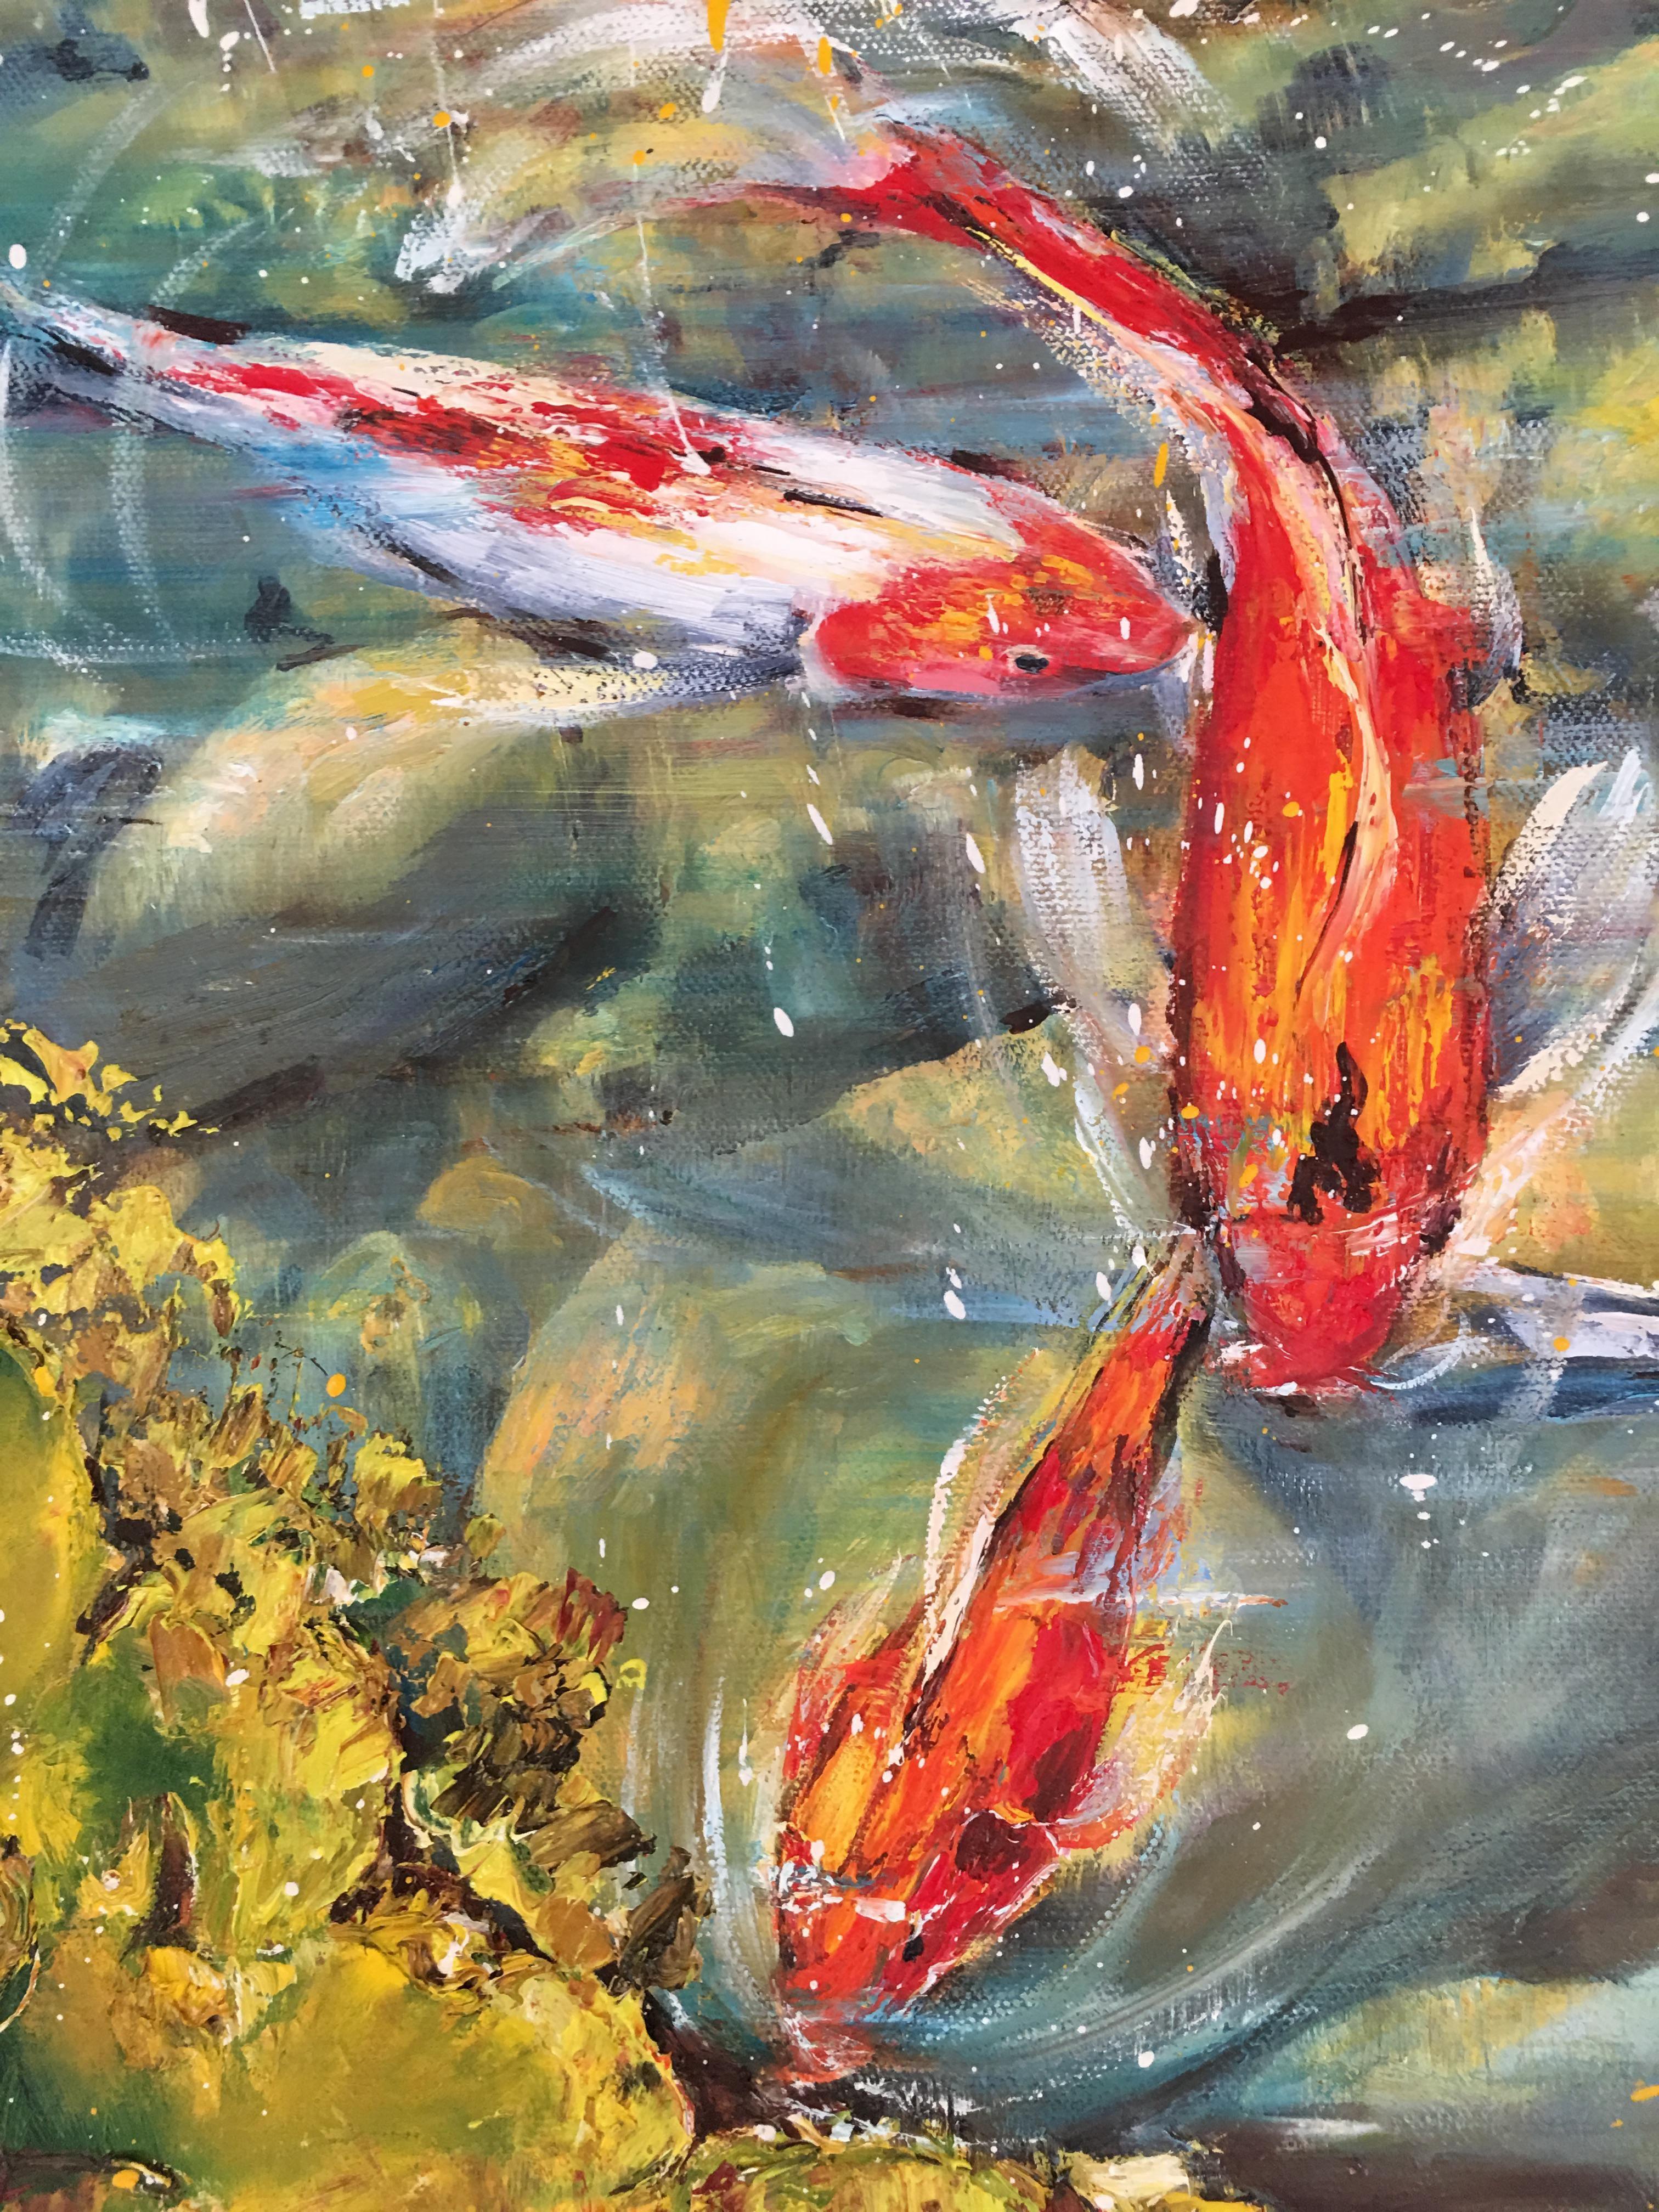 Pond, Painting, Oil on Canvas 3